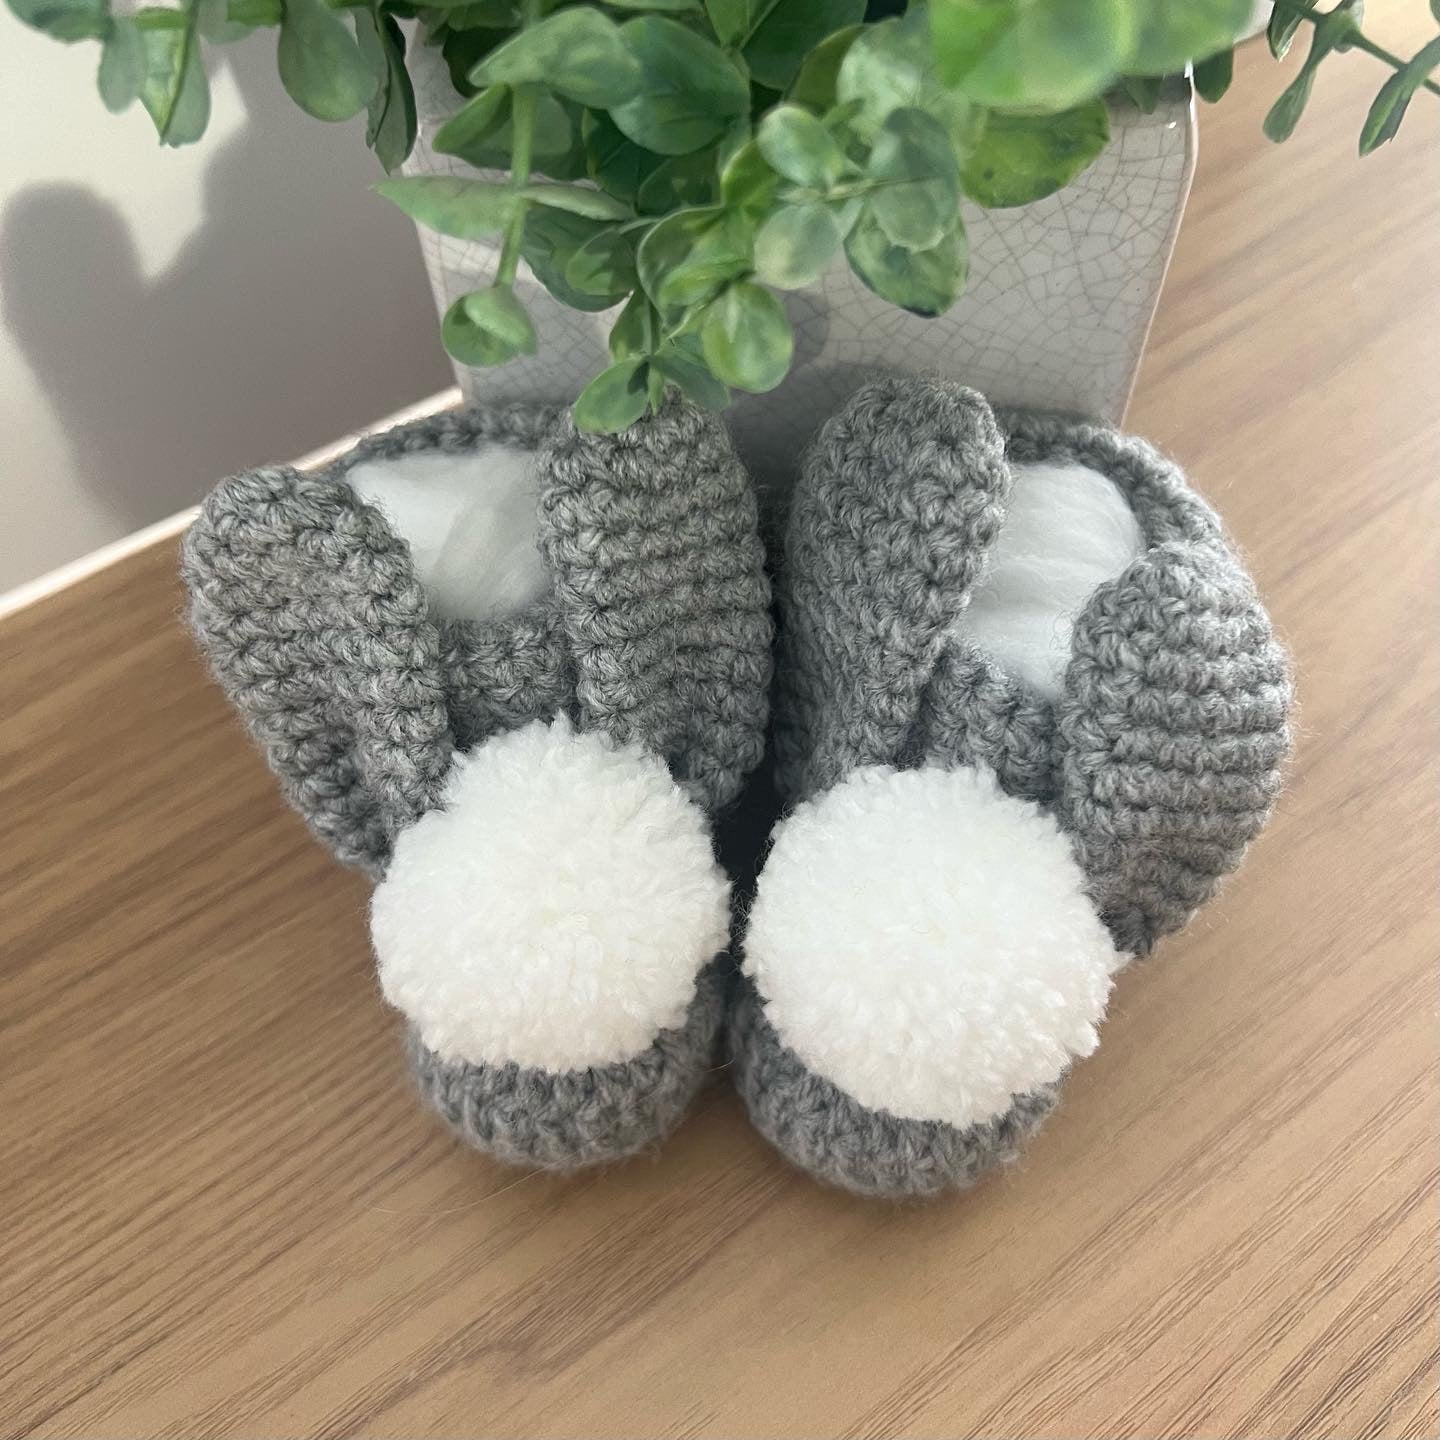 Crocheted baby bootees in grey and white with pom poms and bunny ears.